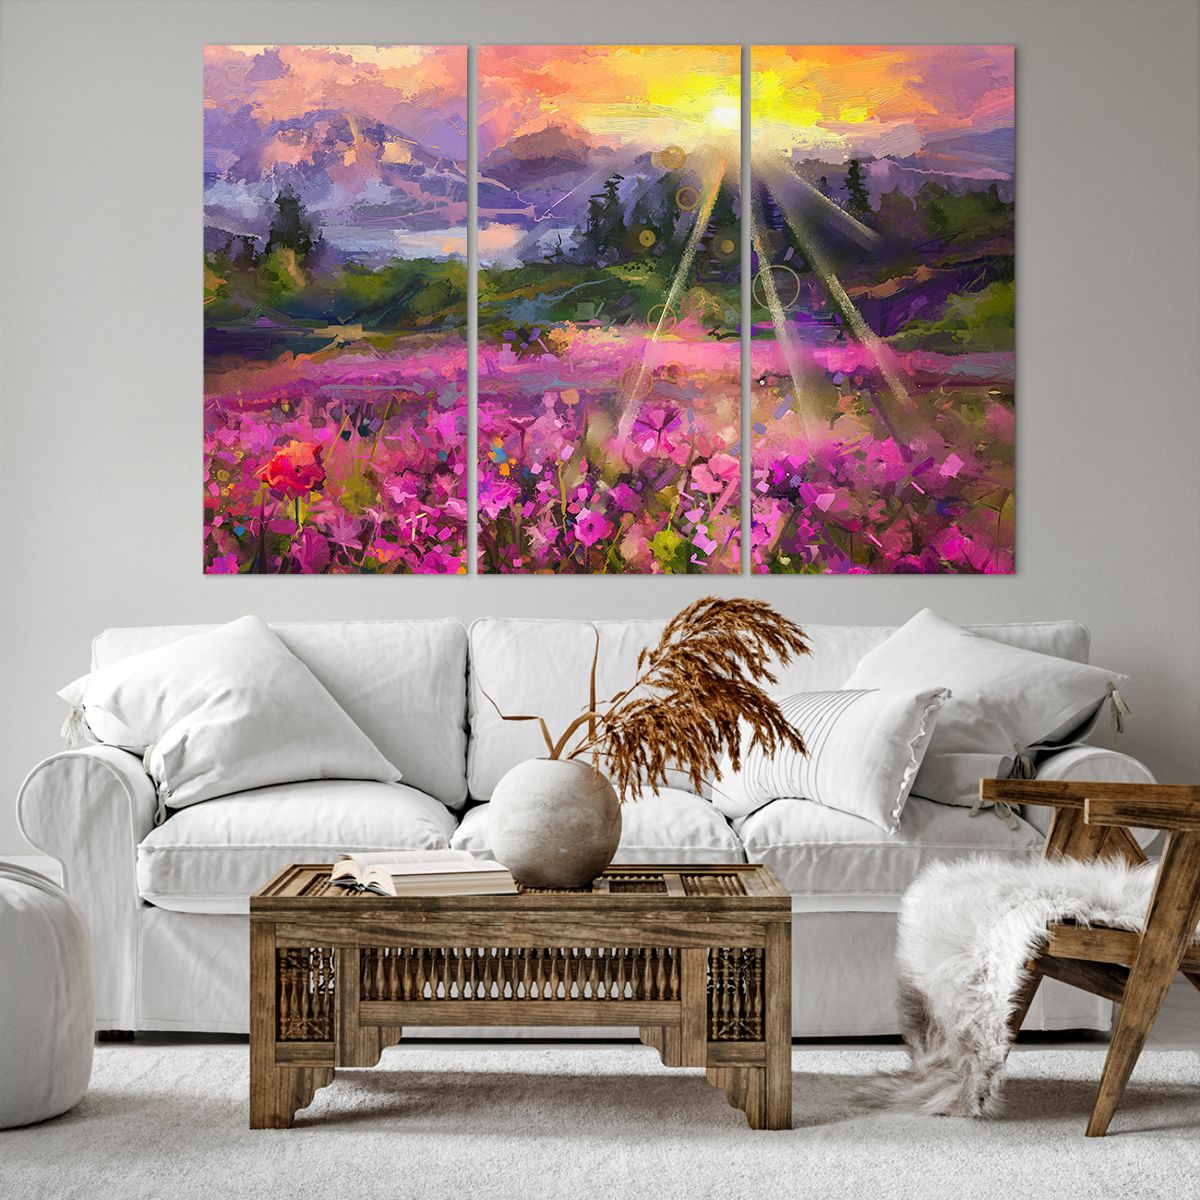 Impression sur toile Abstraction, Impression sur toile Paysage, Impression sur toile Fleurs, Impression sur toile Montagnes, Impression sur toile Art